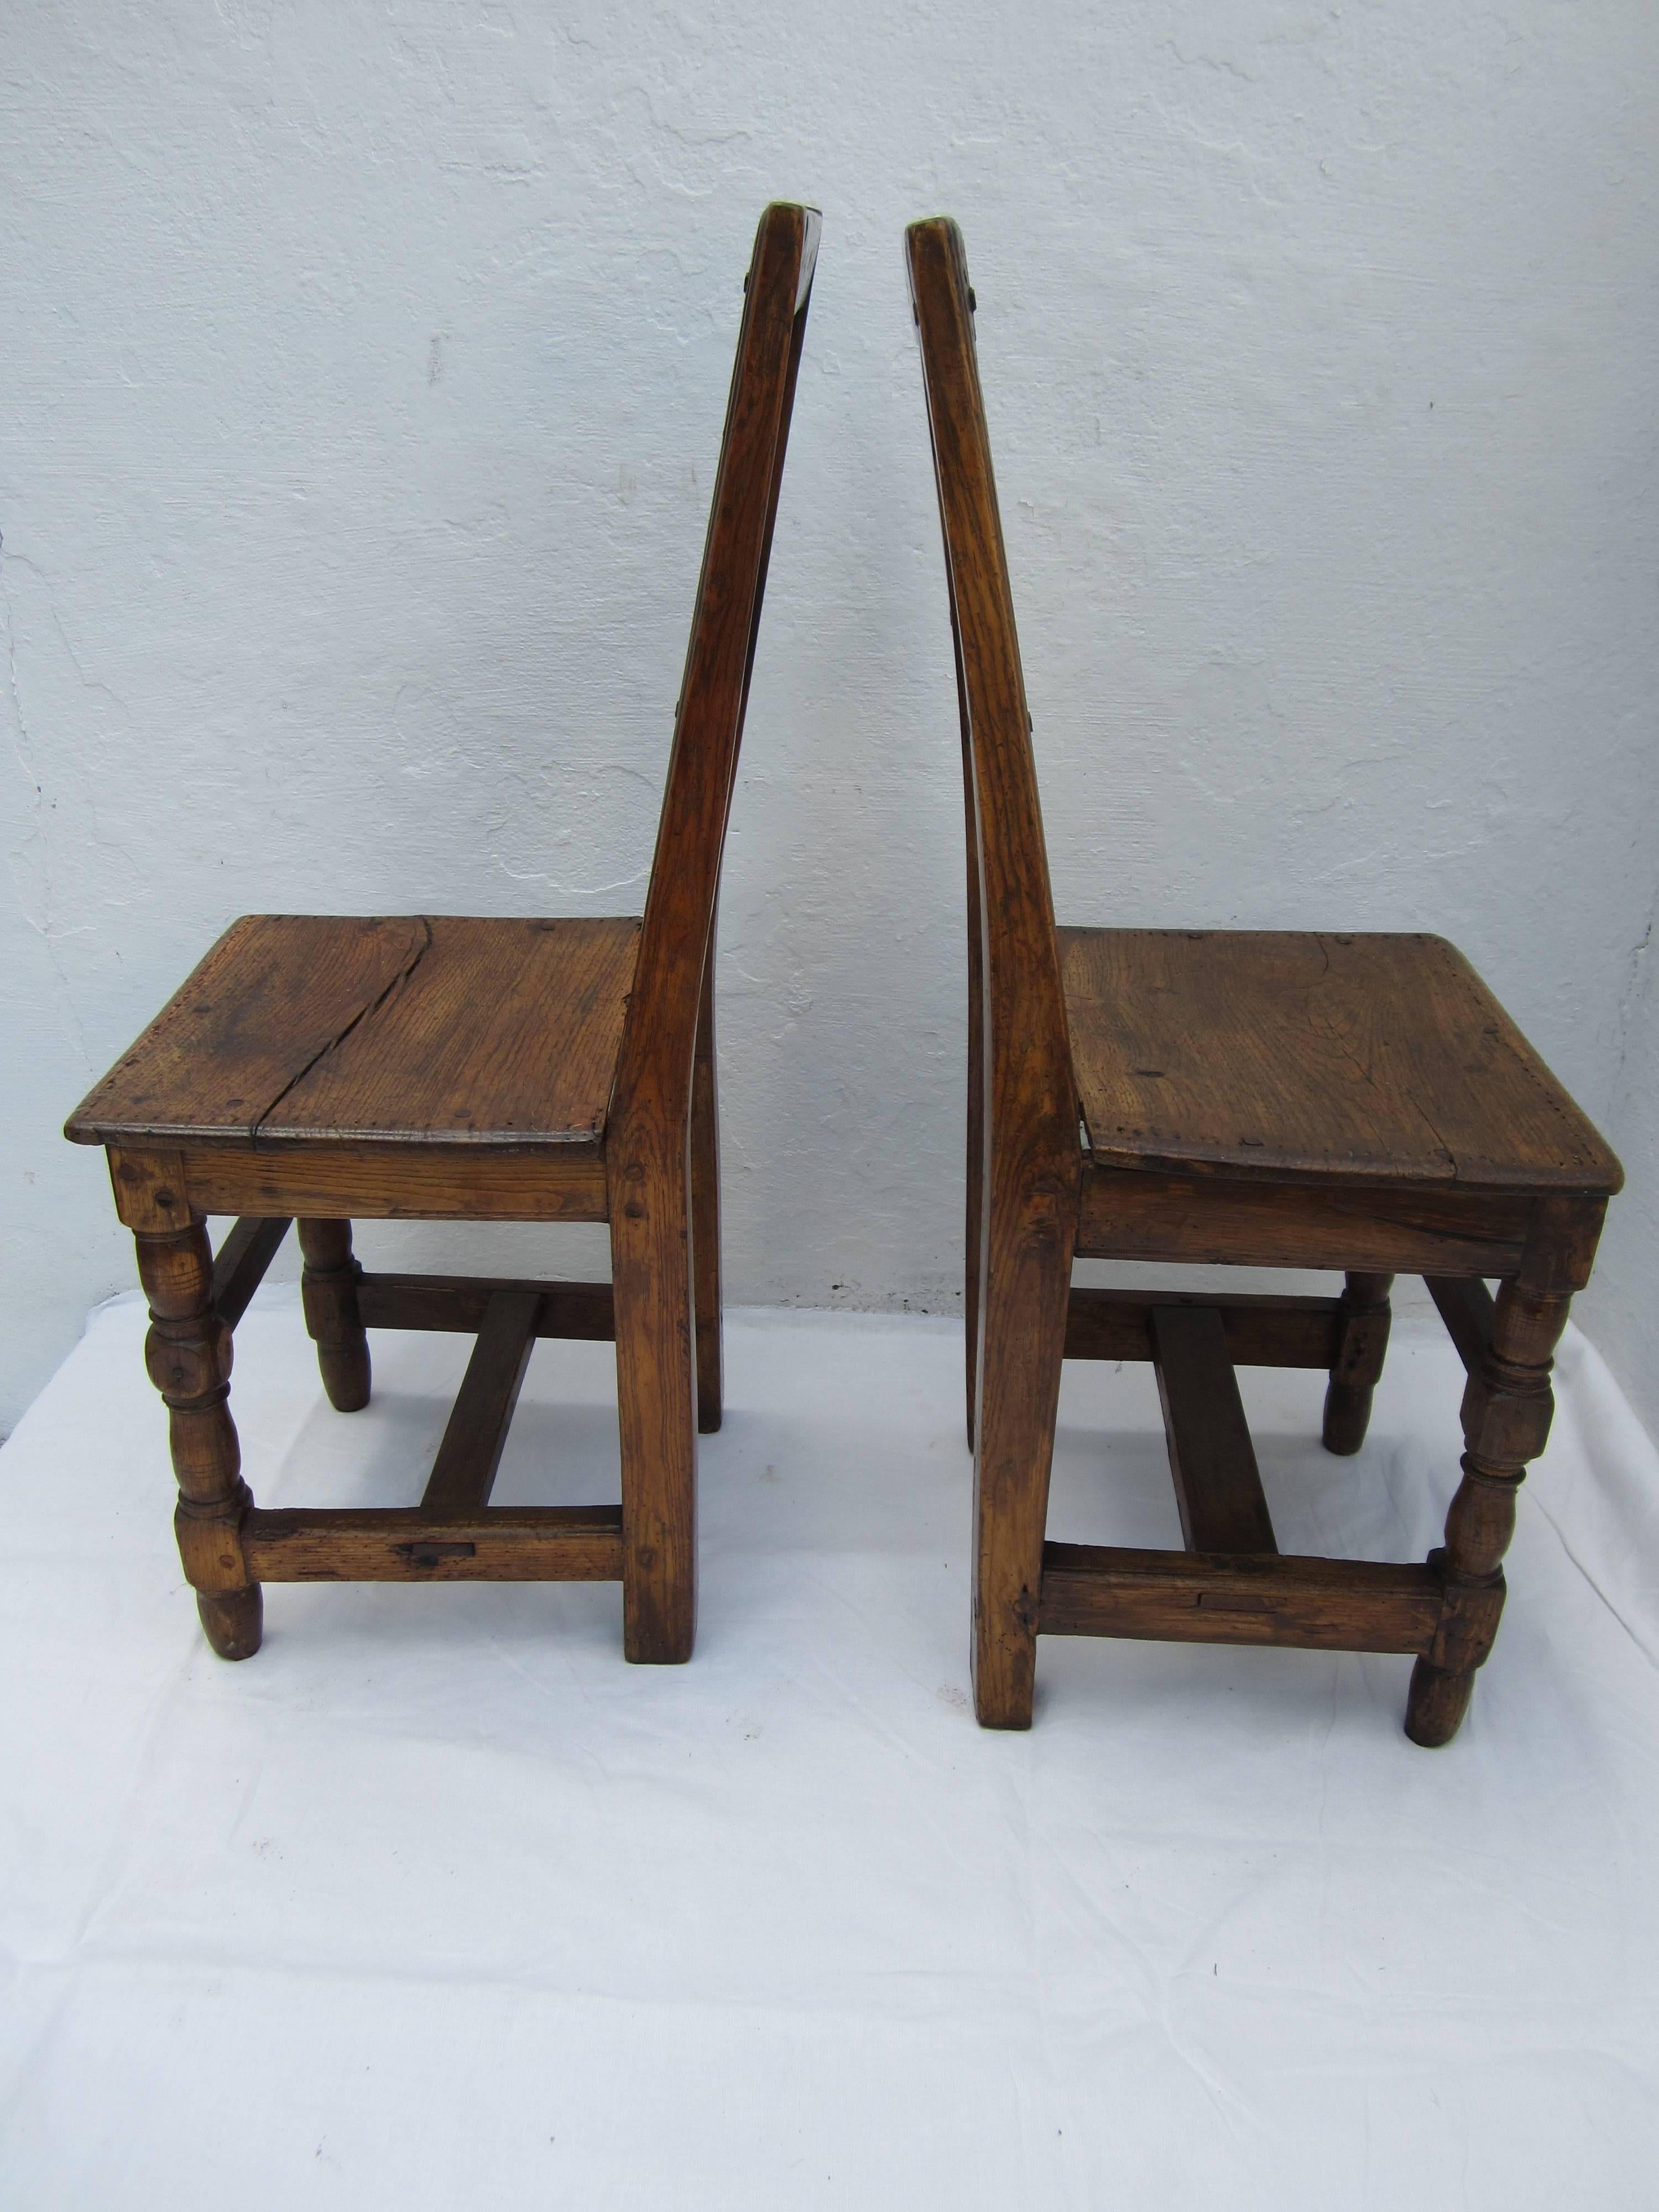 Pair of 17th century French walnut side chairs.